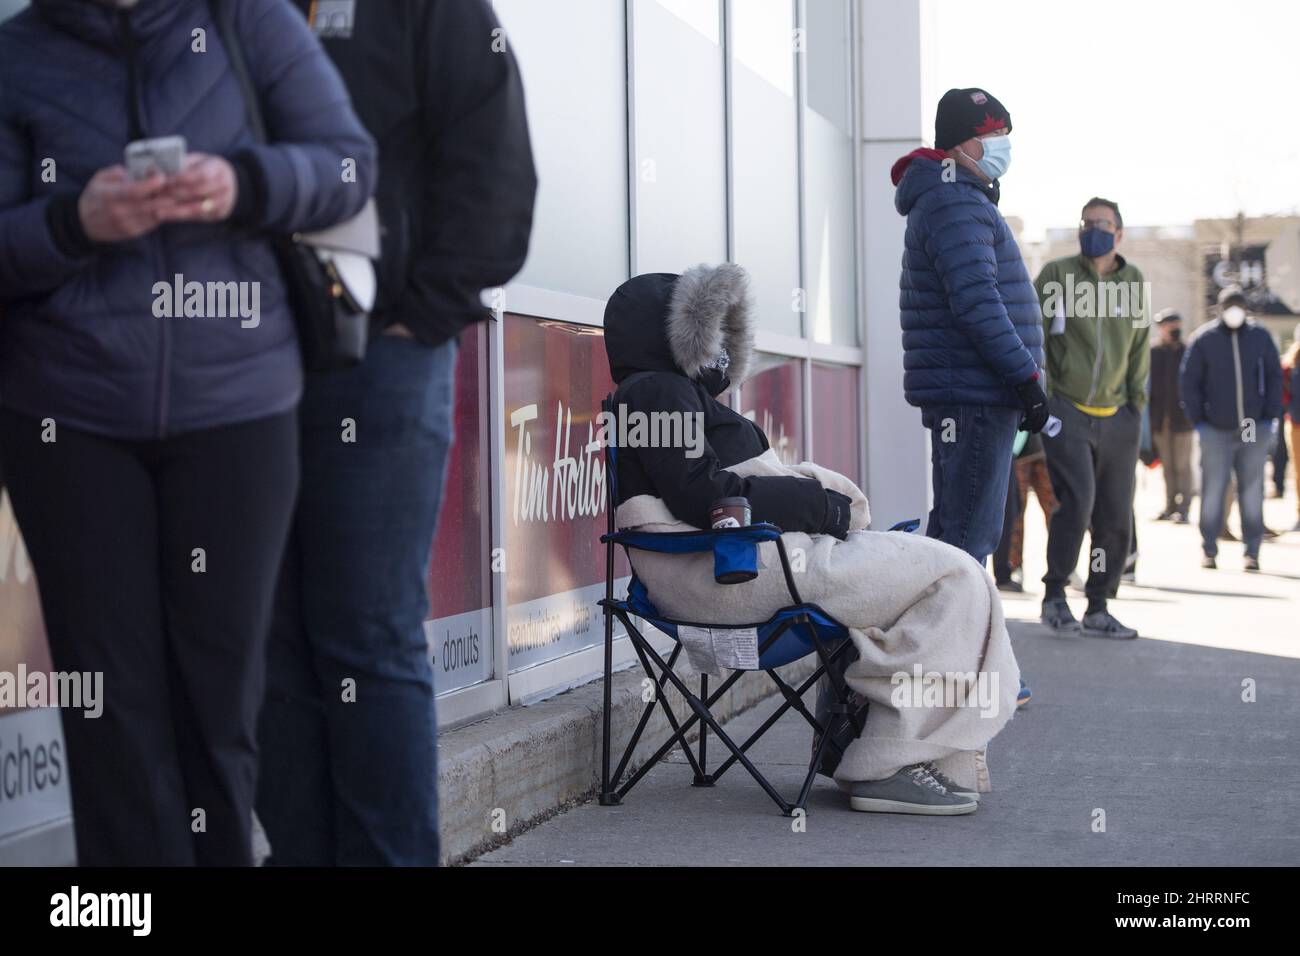 Kerry, 43, tries to keep warm under a blanket and her winter coat as she holds a place in line for a friend who is a stroke survivor and uses walker for their reduced mobility, and would not be able to stand in a hours-long lineup, outside a Loblaws pharmacy that had a limited number of COVID-19 vaccines available, in Ottawa, on Monday, April 26, 2021. THE CANADIAN PRESS/Justin Tang Stock Photo